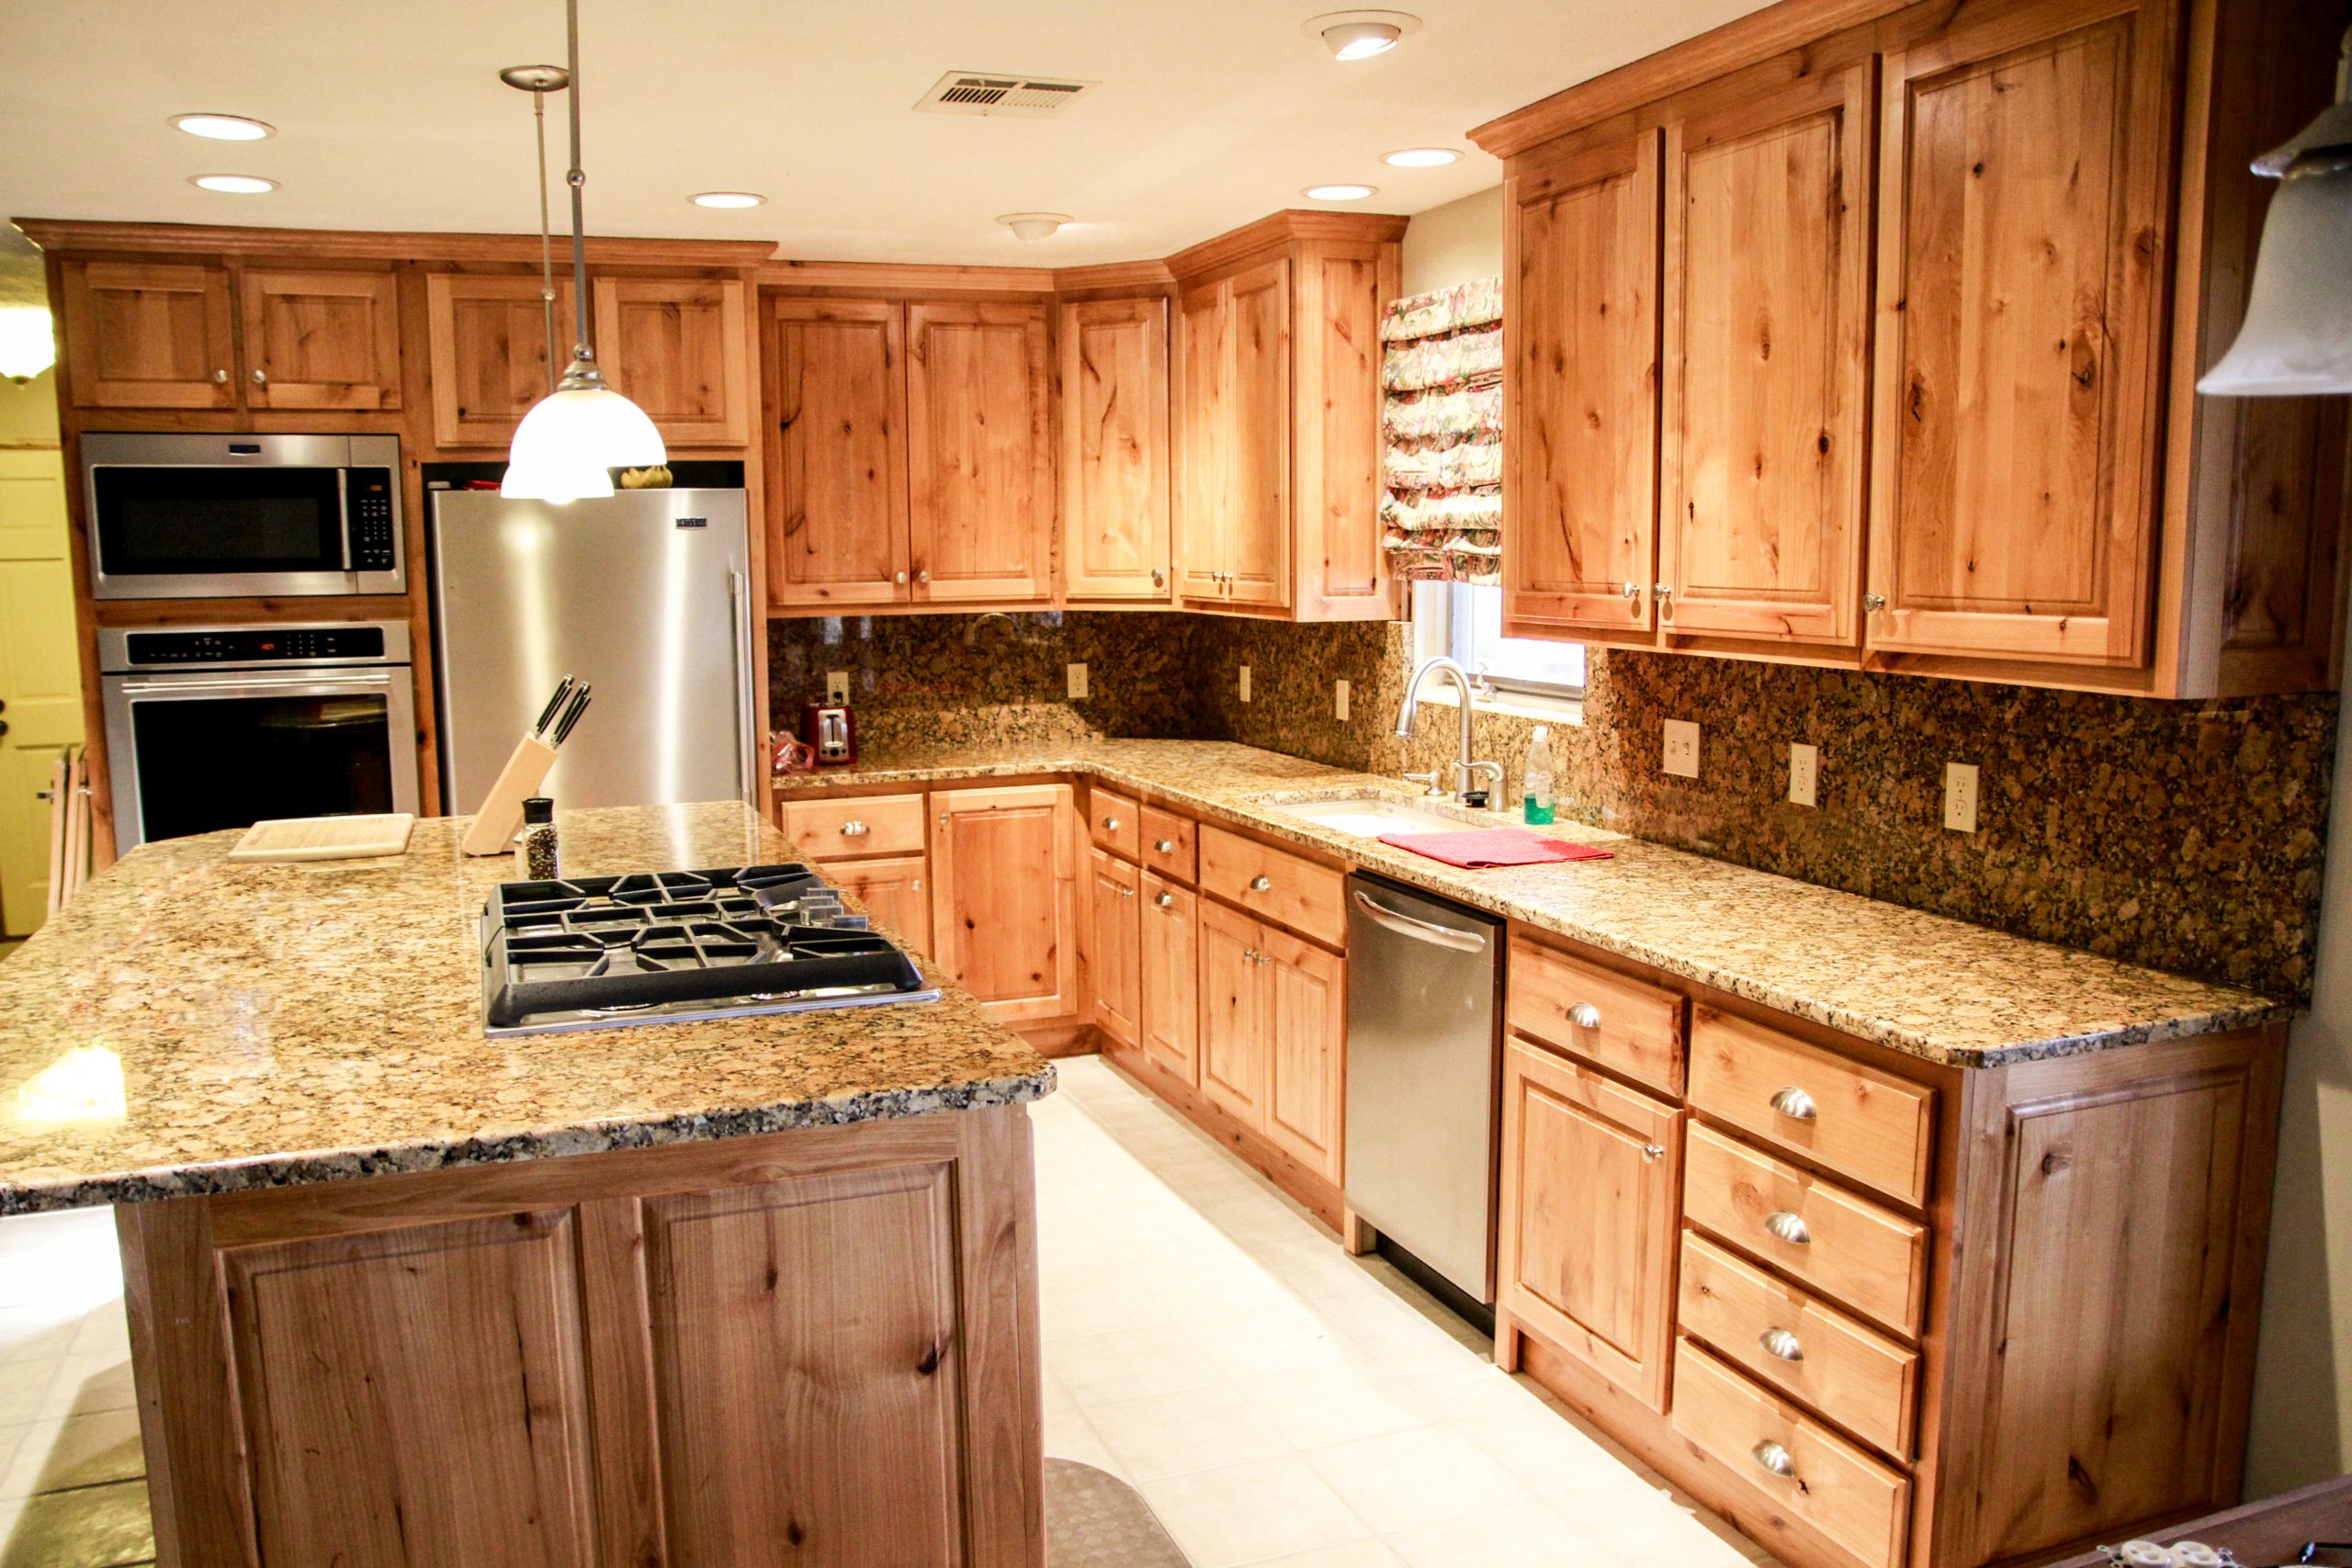 Farmhouse Kitchen Cabinets in Forked River NJ, Buy custom kitchen cabinets factory direct in Forked River NJ, Buy custom shaker cabinets factory direct in Forked River NJ